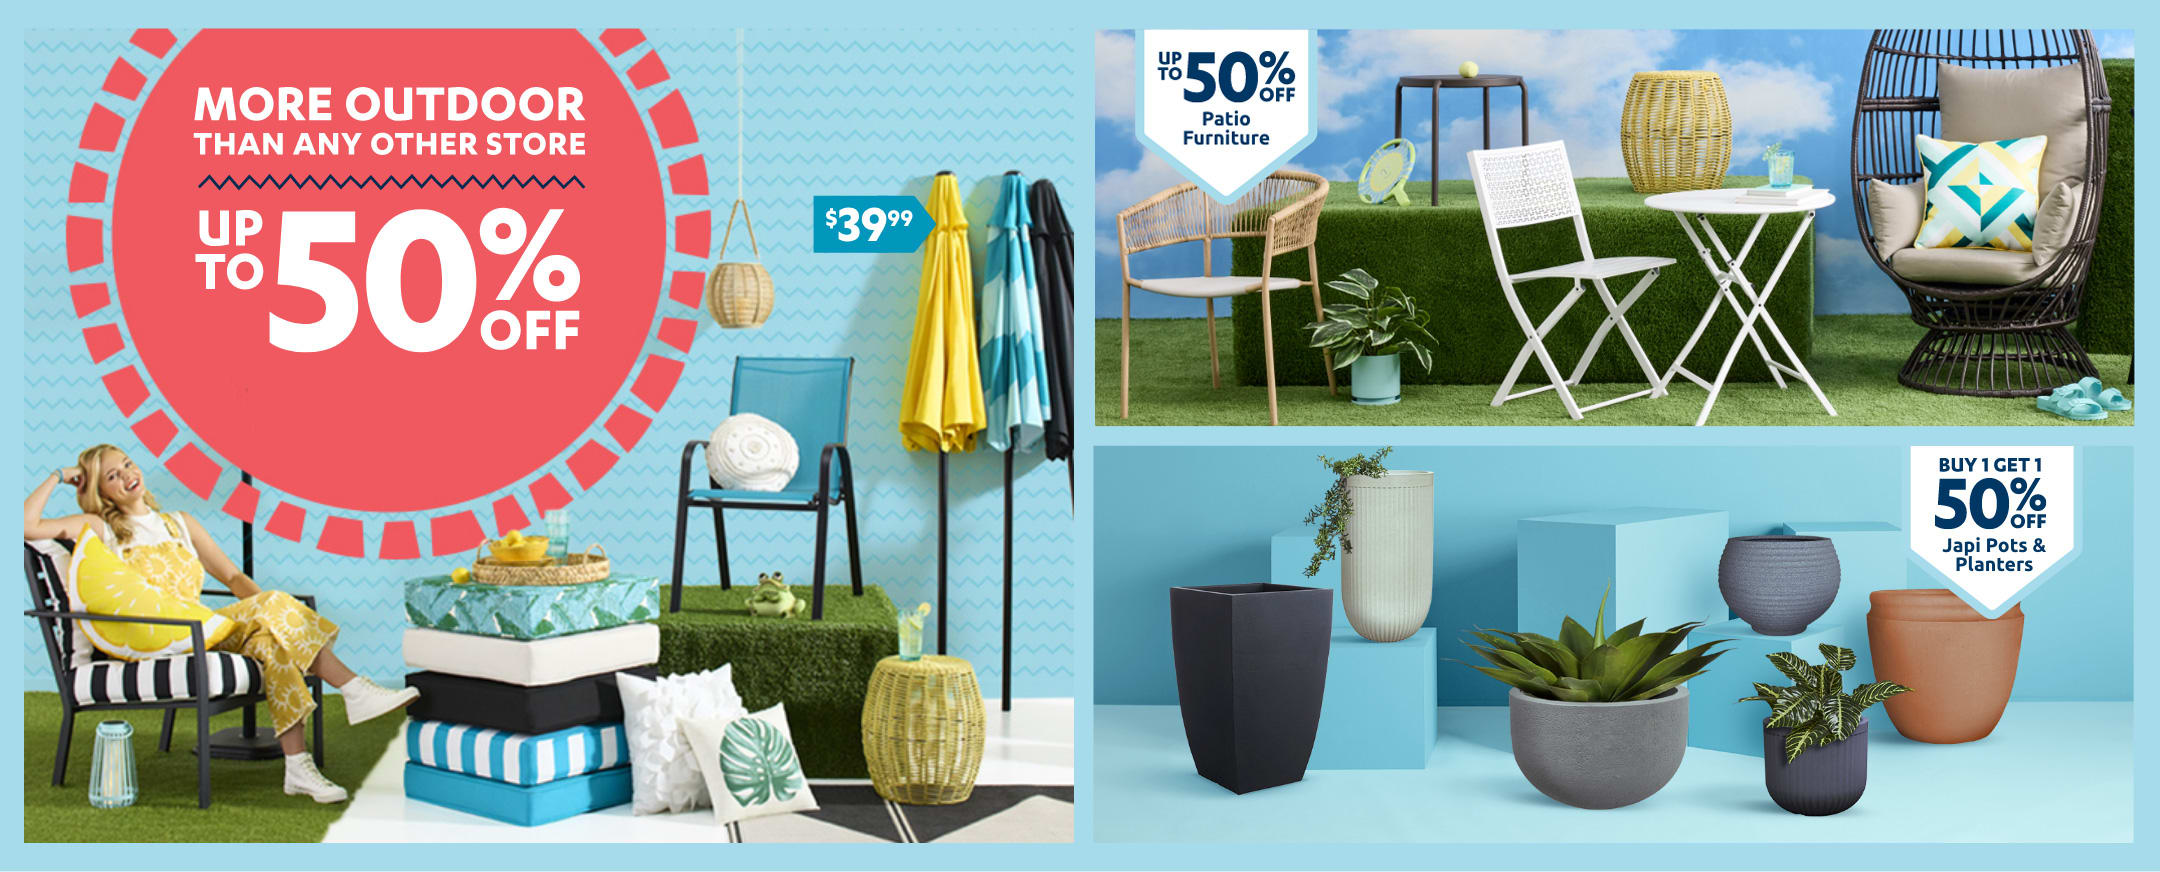 at Home - Furniture Sale up to 50% Off!